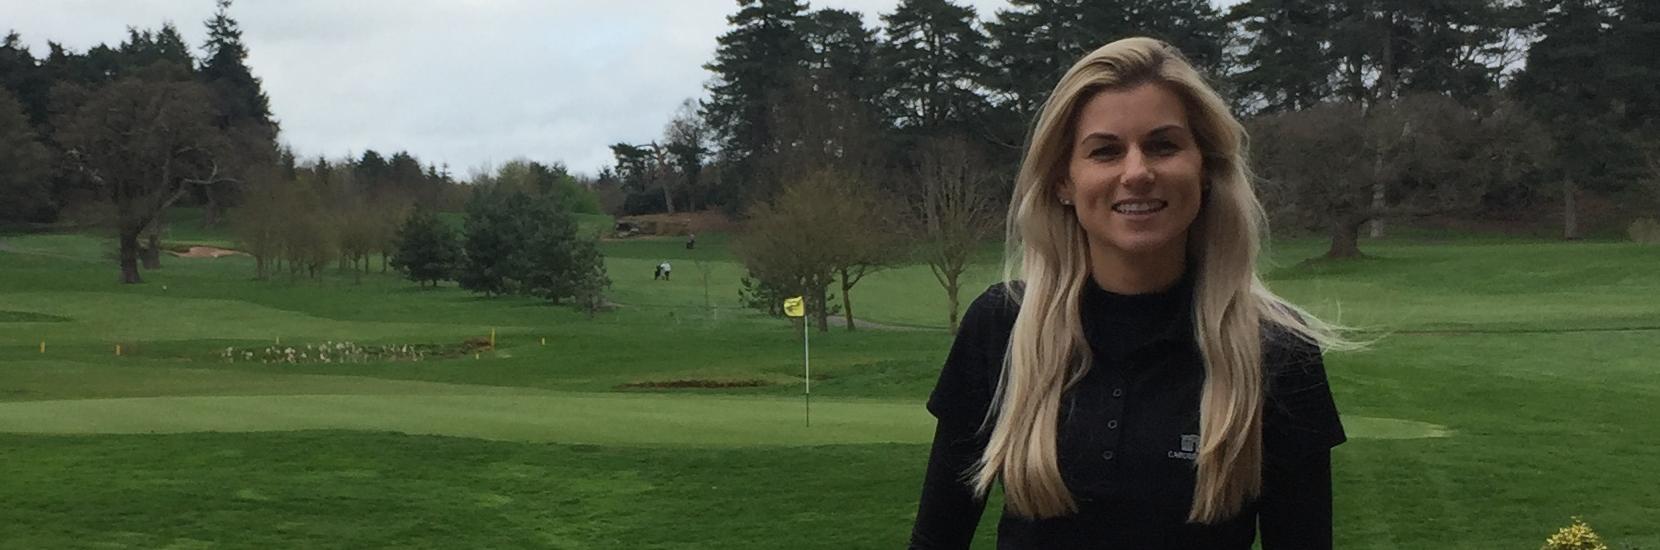 Carden Park – Emma’s promotionvcrop tees up new golf season at Carden – image